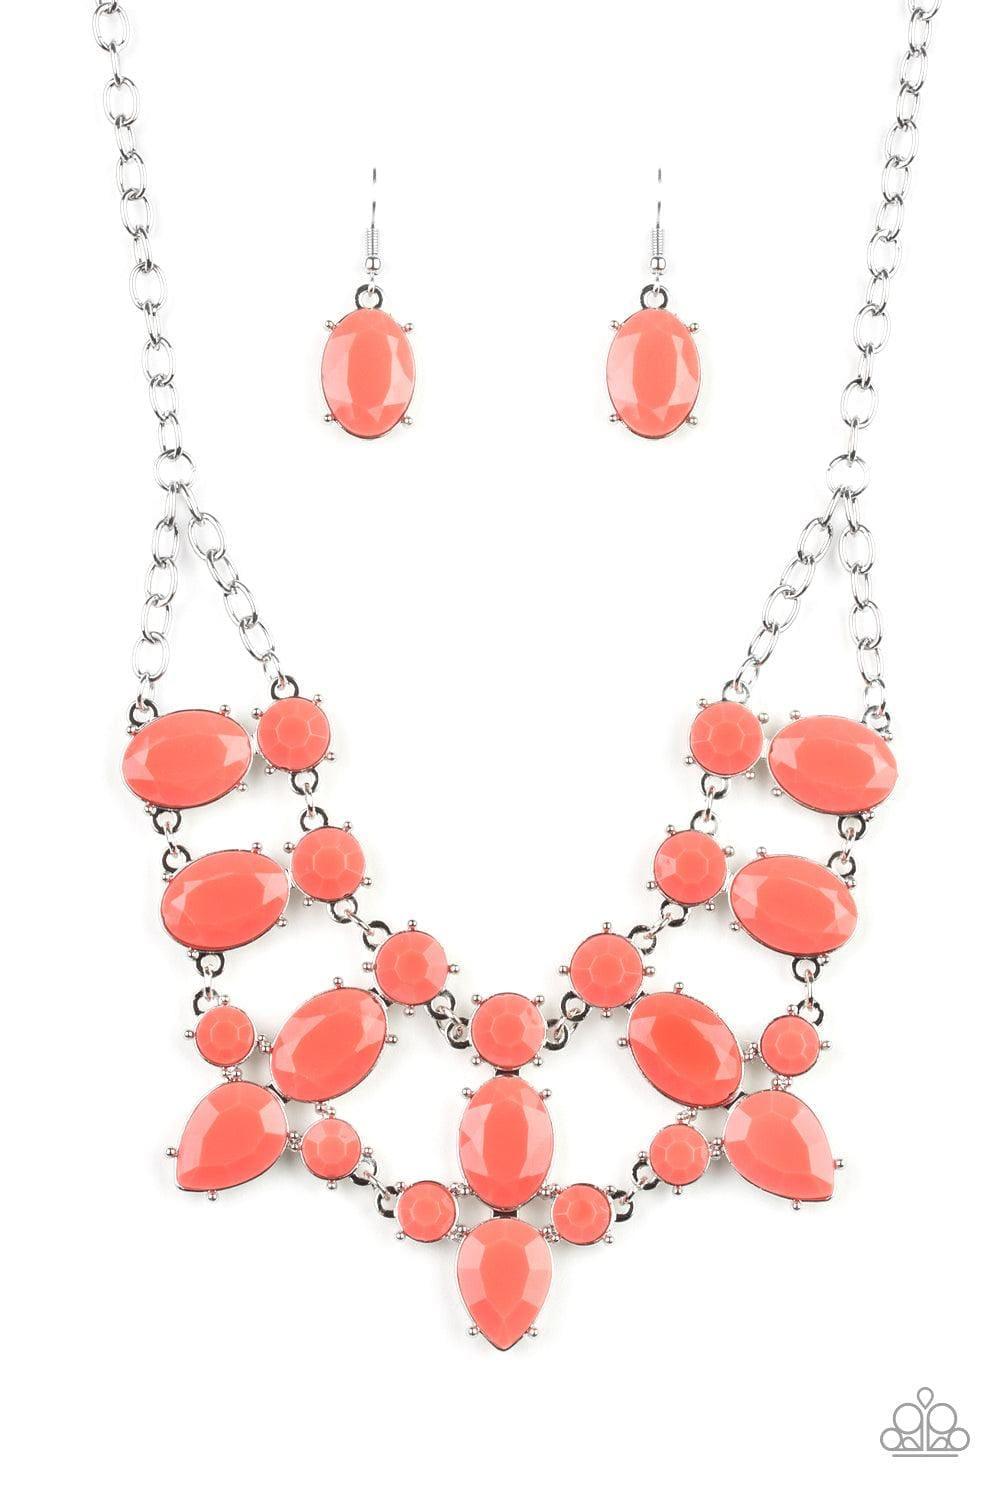 Paparazzi Accessories - Goddess Glow - Coral Necklace - Bling by JessieK